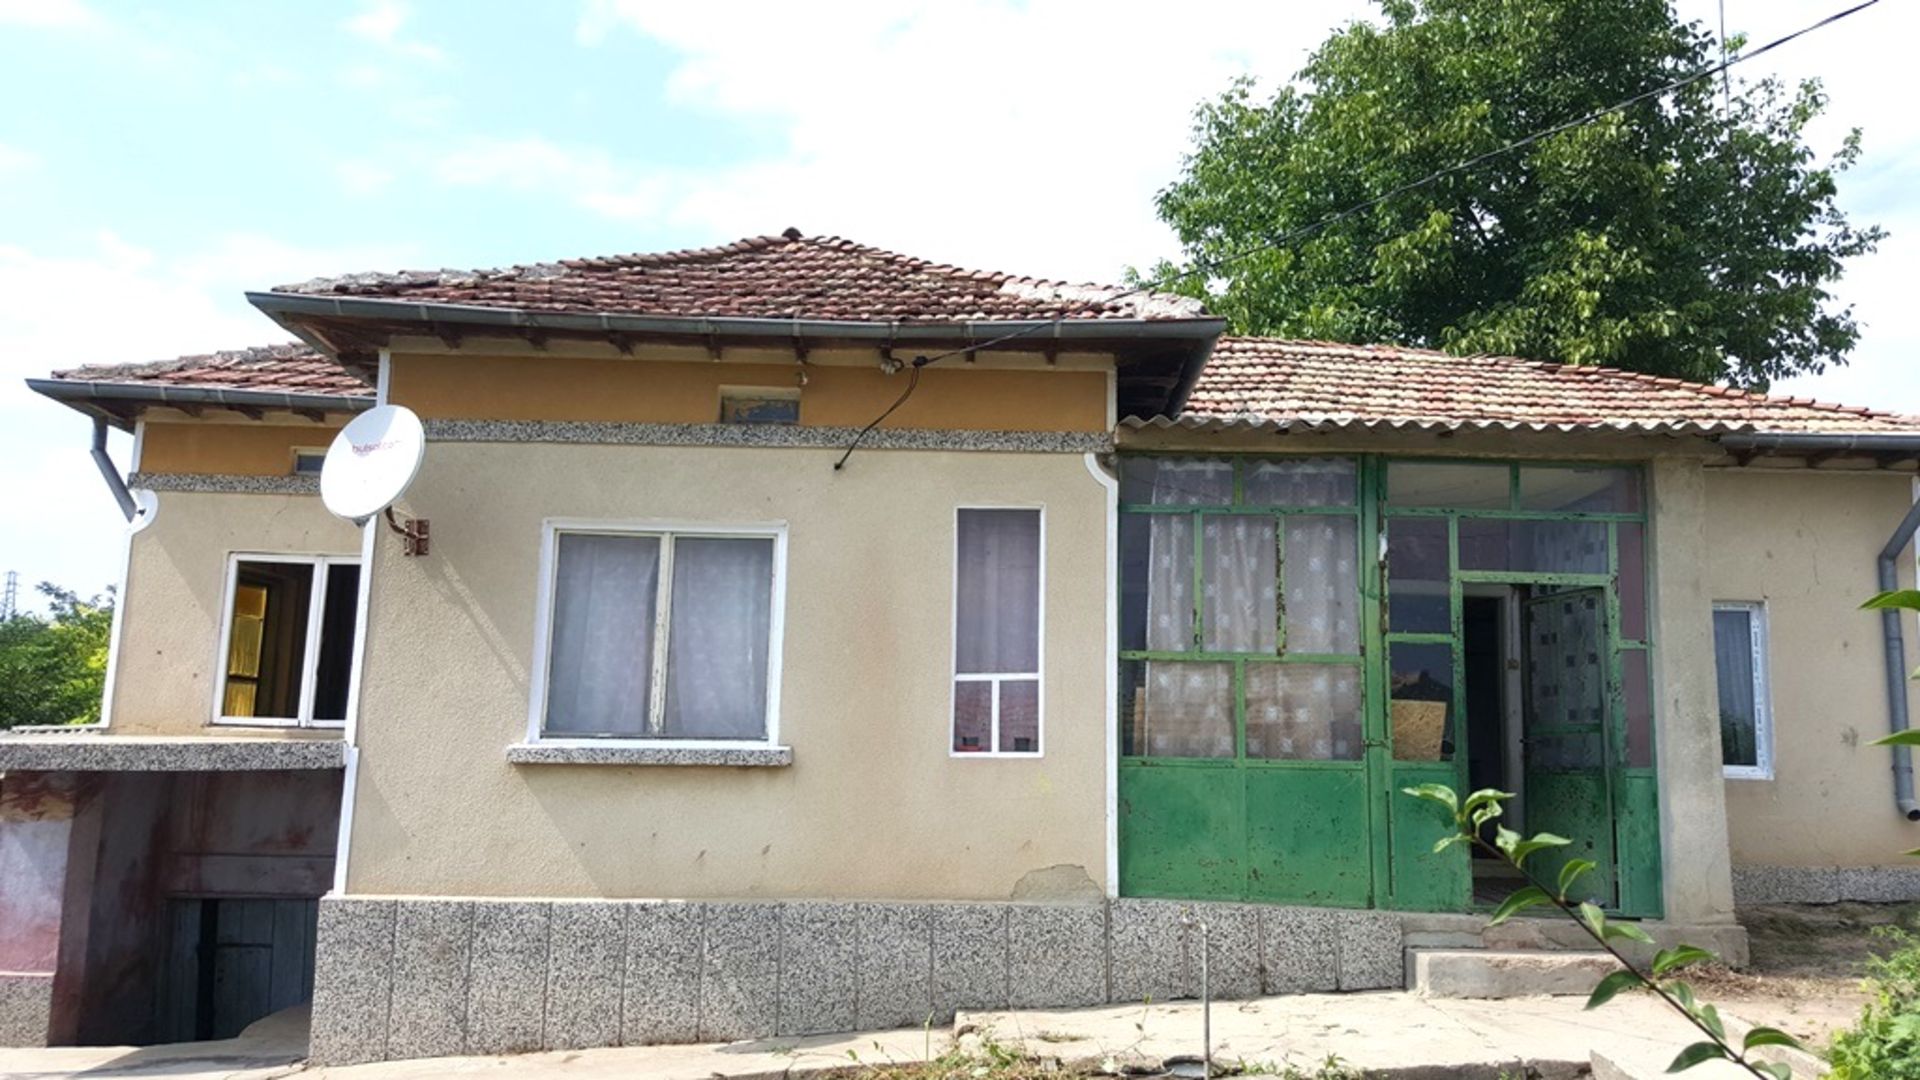 Sunny Bulgarian cottage 30 miles from beaches   Here is a great opportunity to snap up a well- - Image 5 of 26